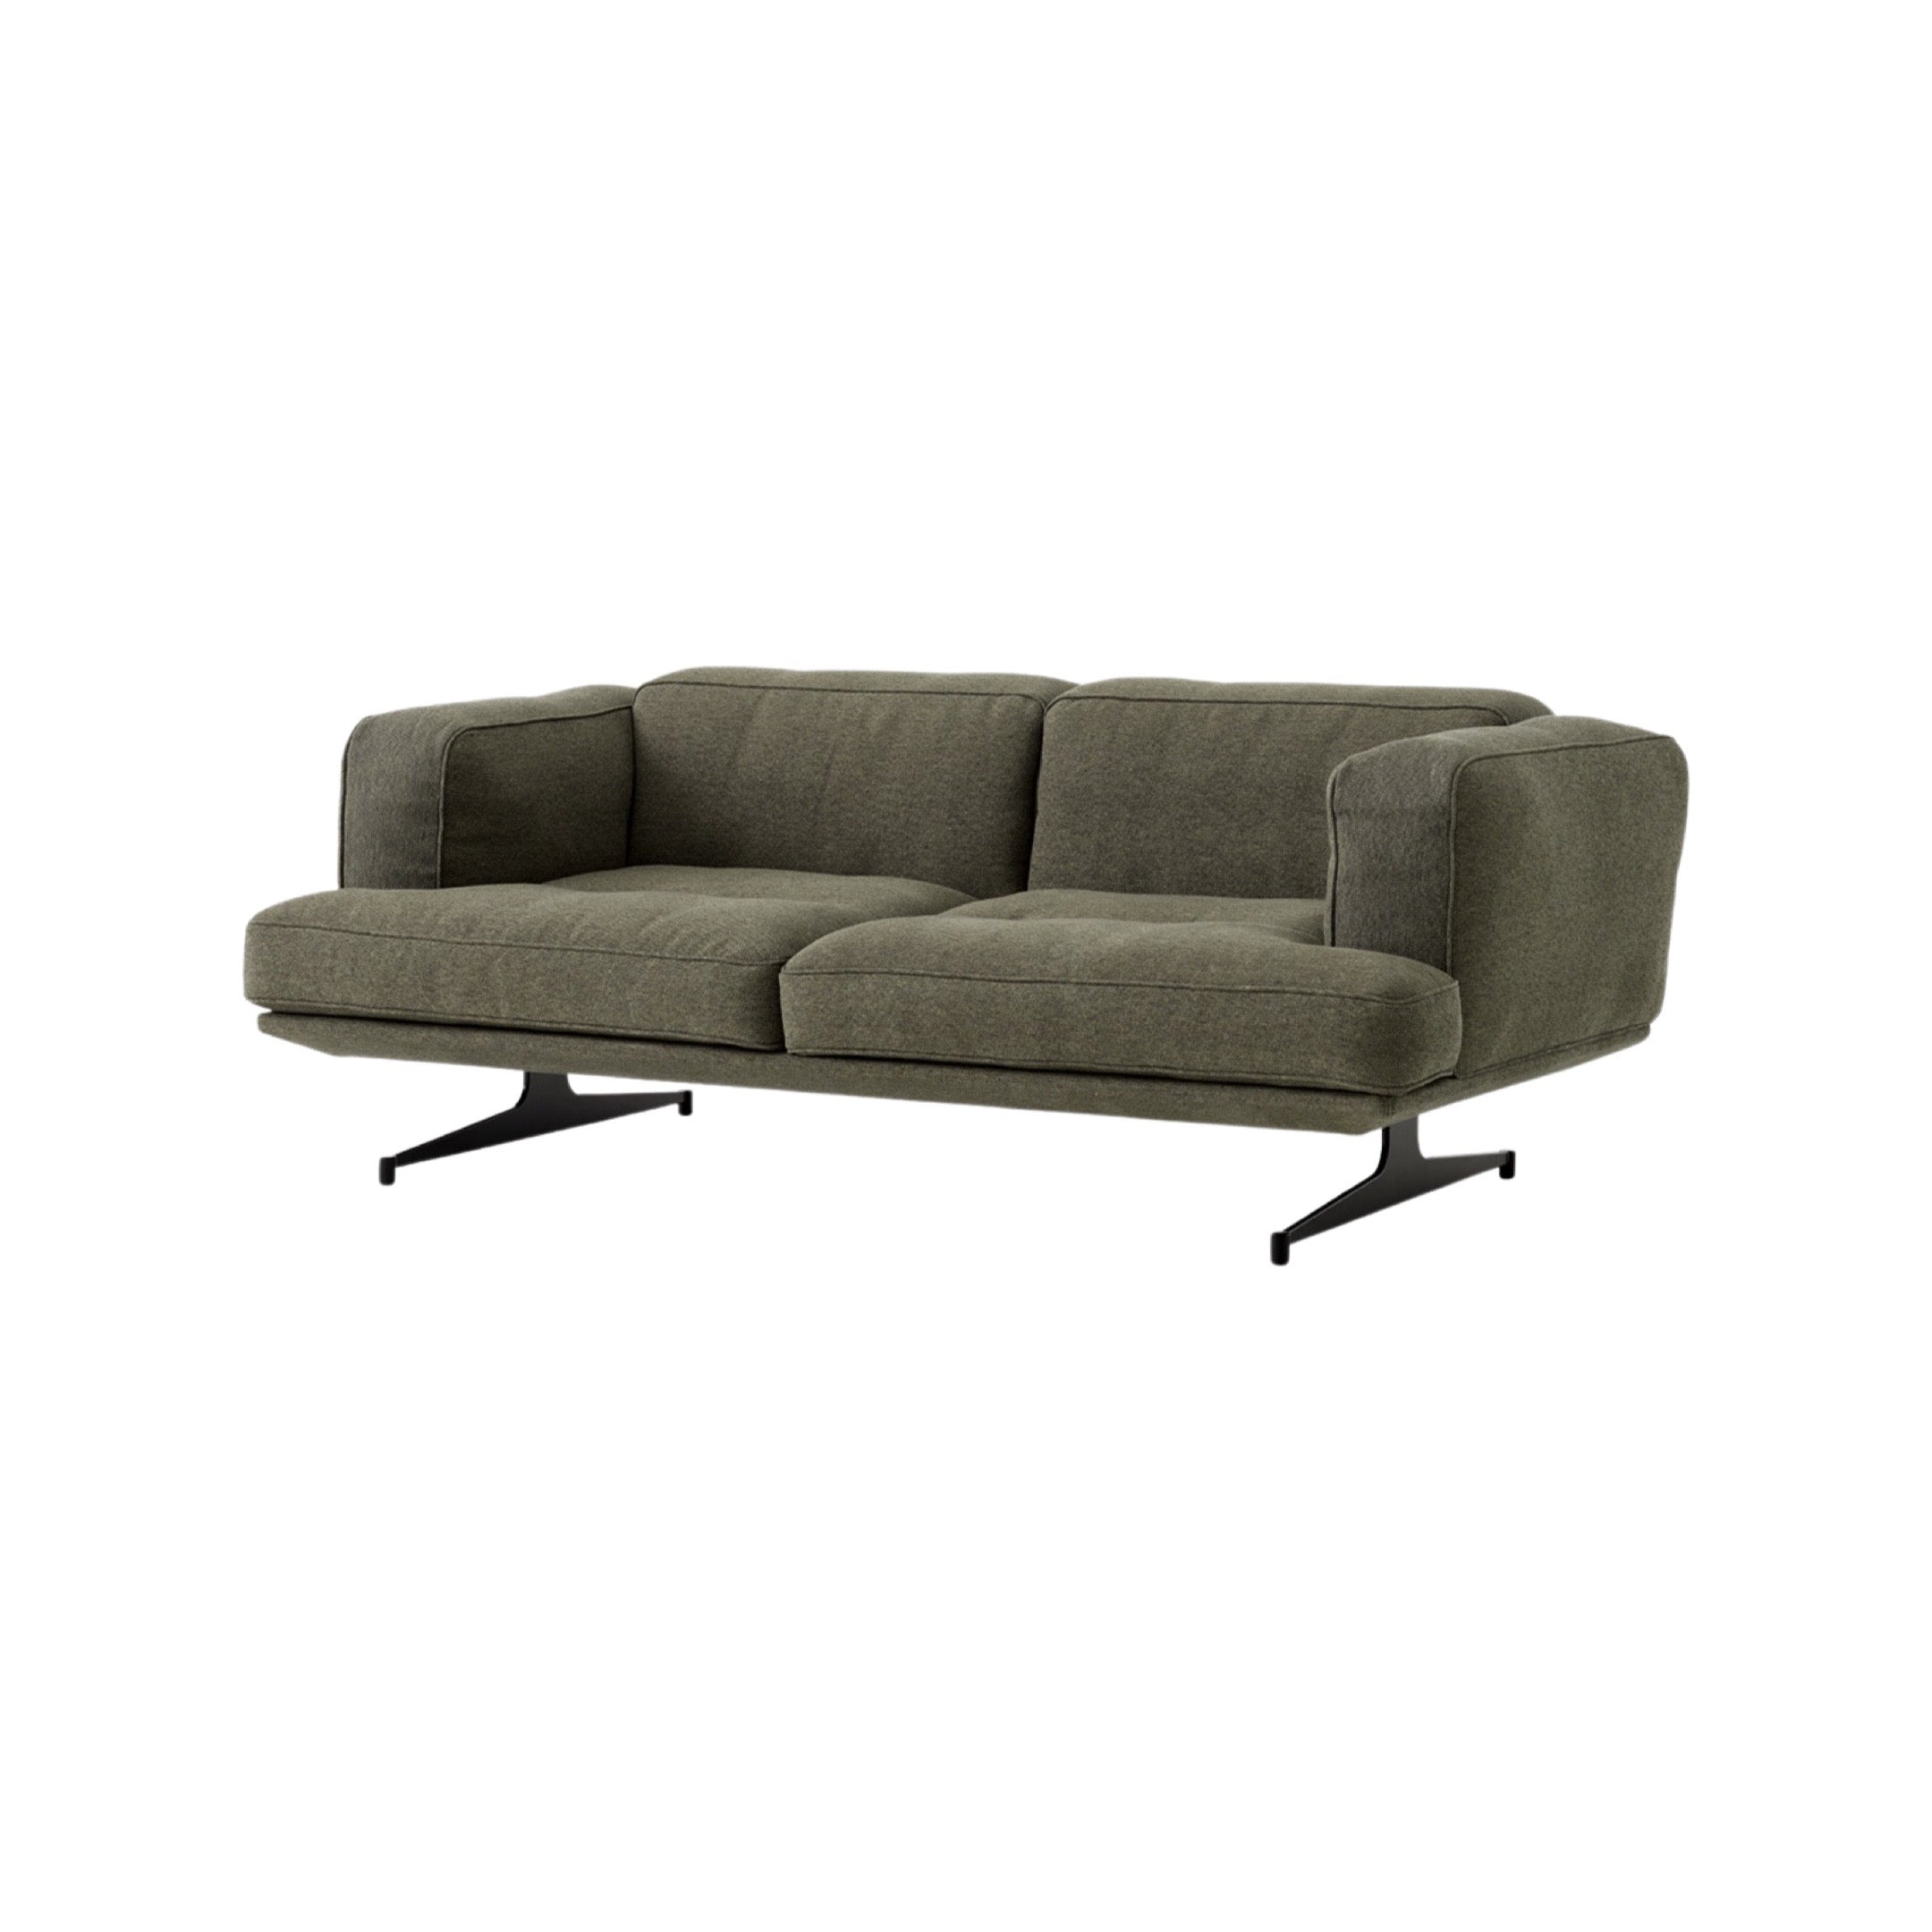 &Tradition Inland 2 Seater Sofa